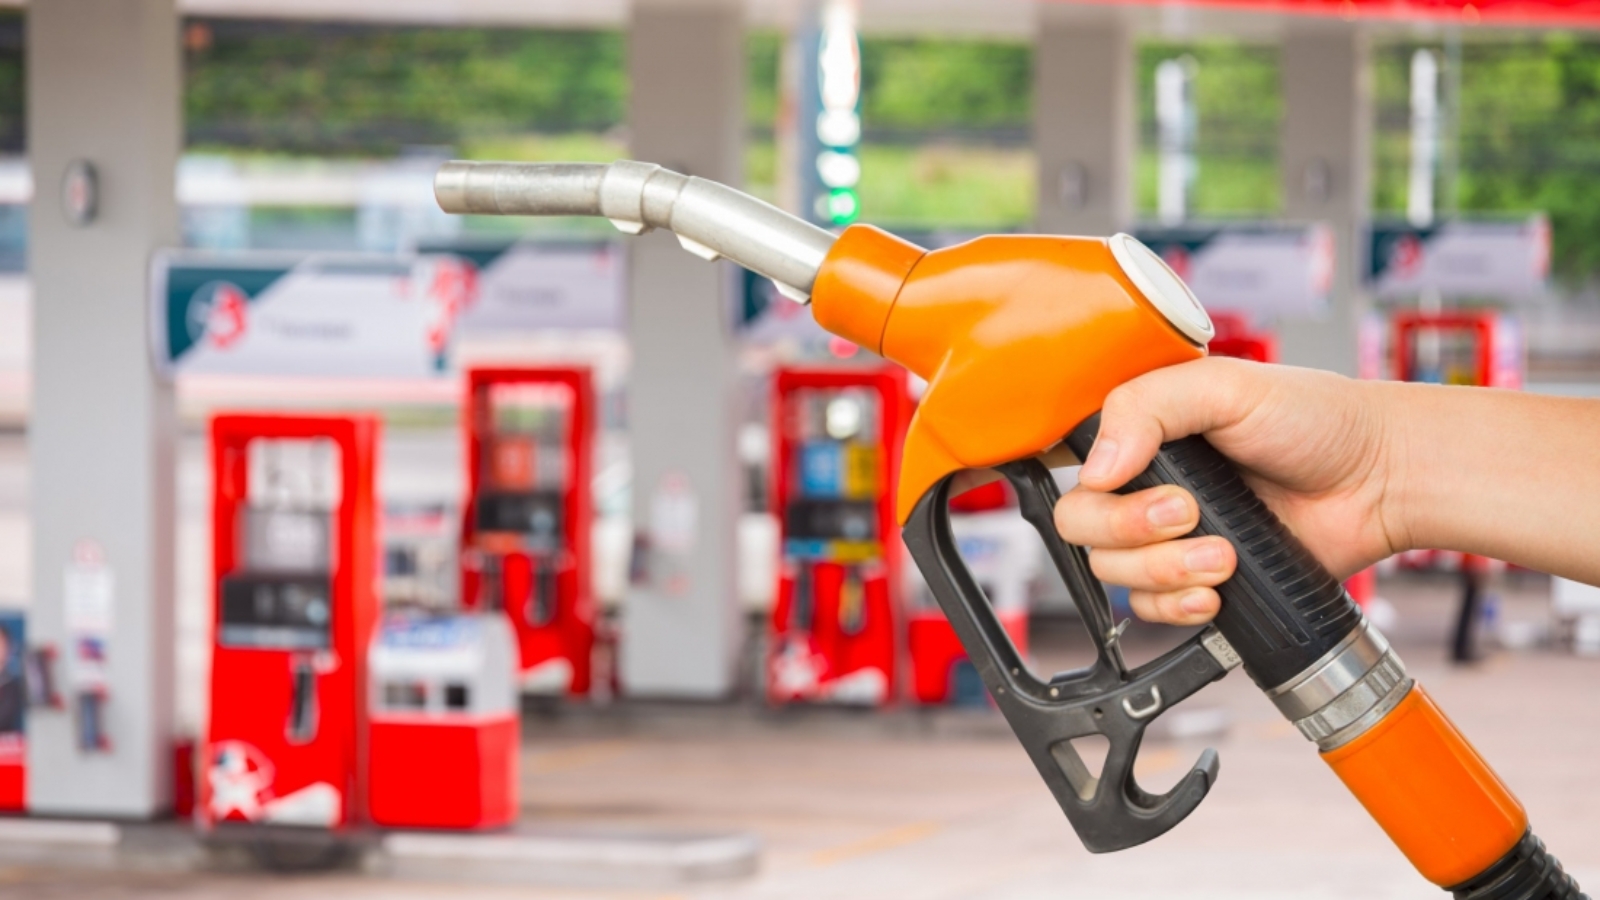 man-hold-fuel-nozzle-add-fuel-car-gas-station-scaled-1100x619